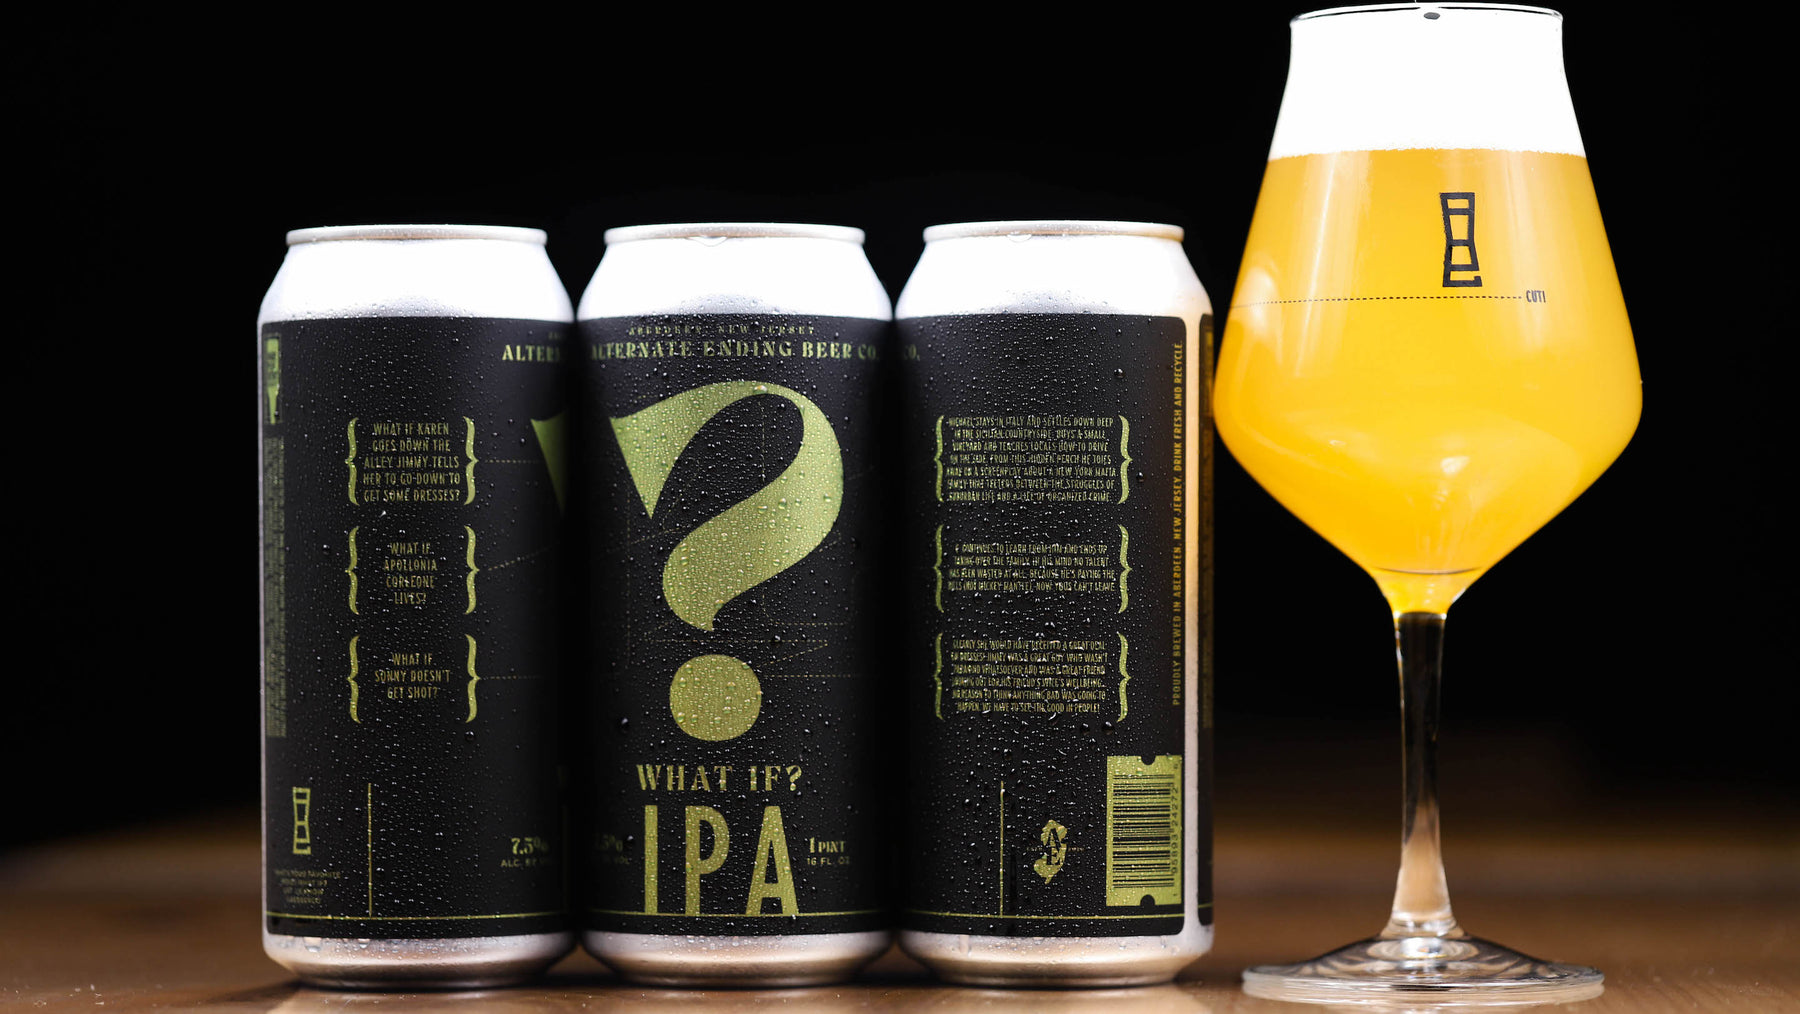 Alternate Ending Beer Co. What If Flagship IPA 7/5%